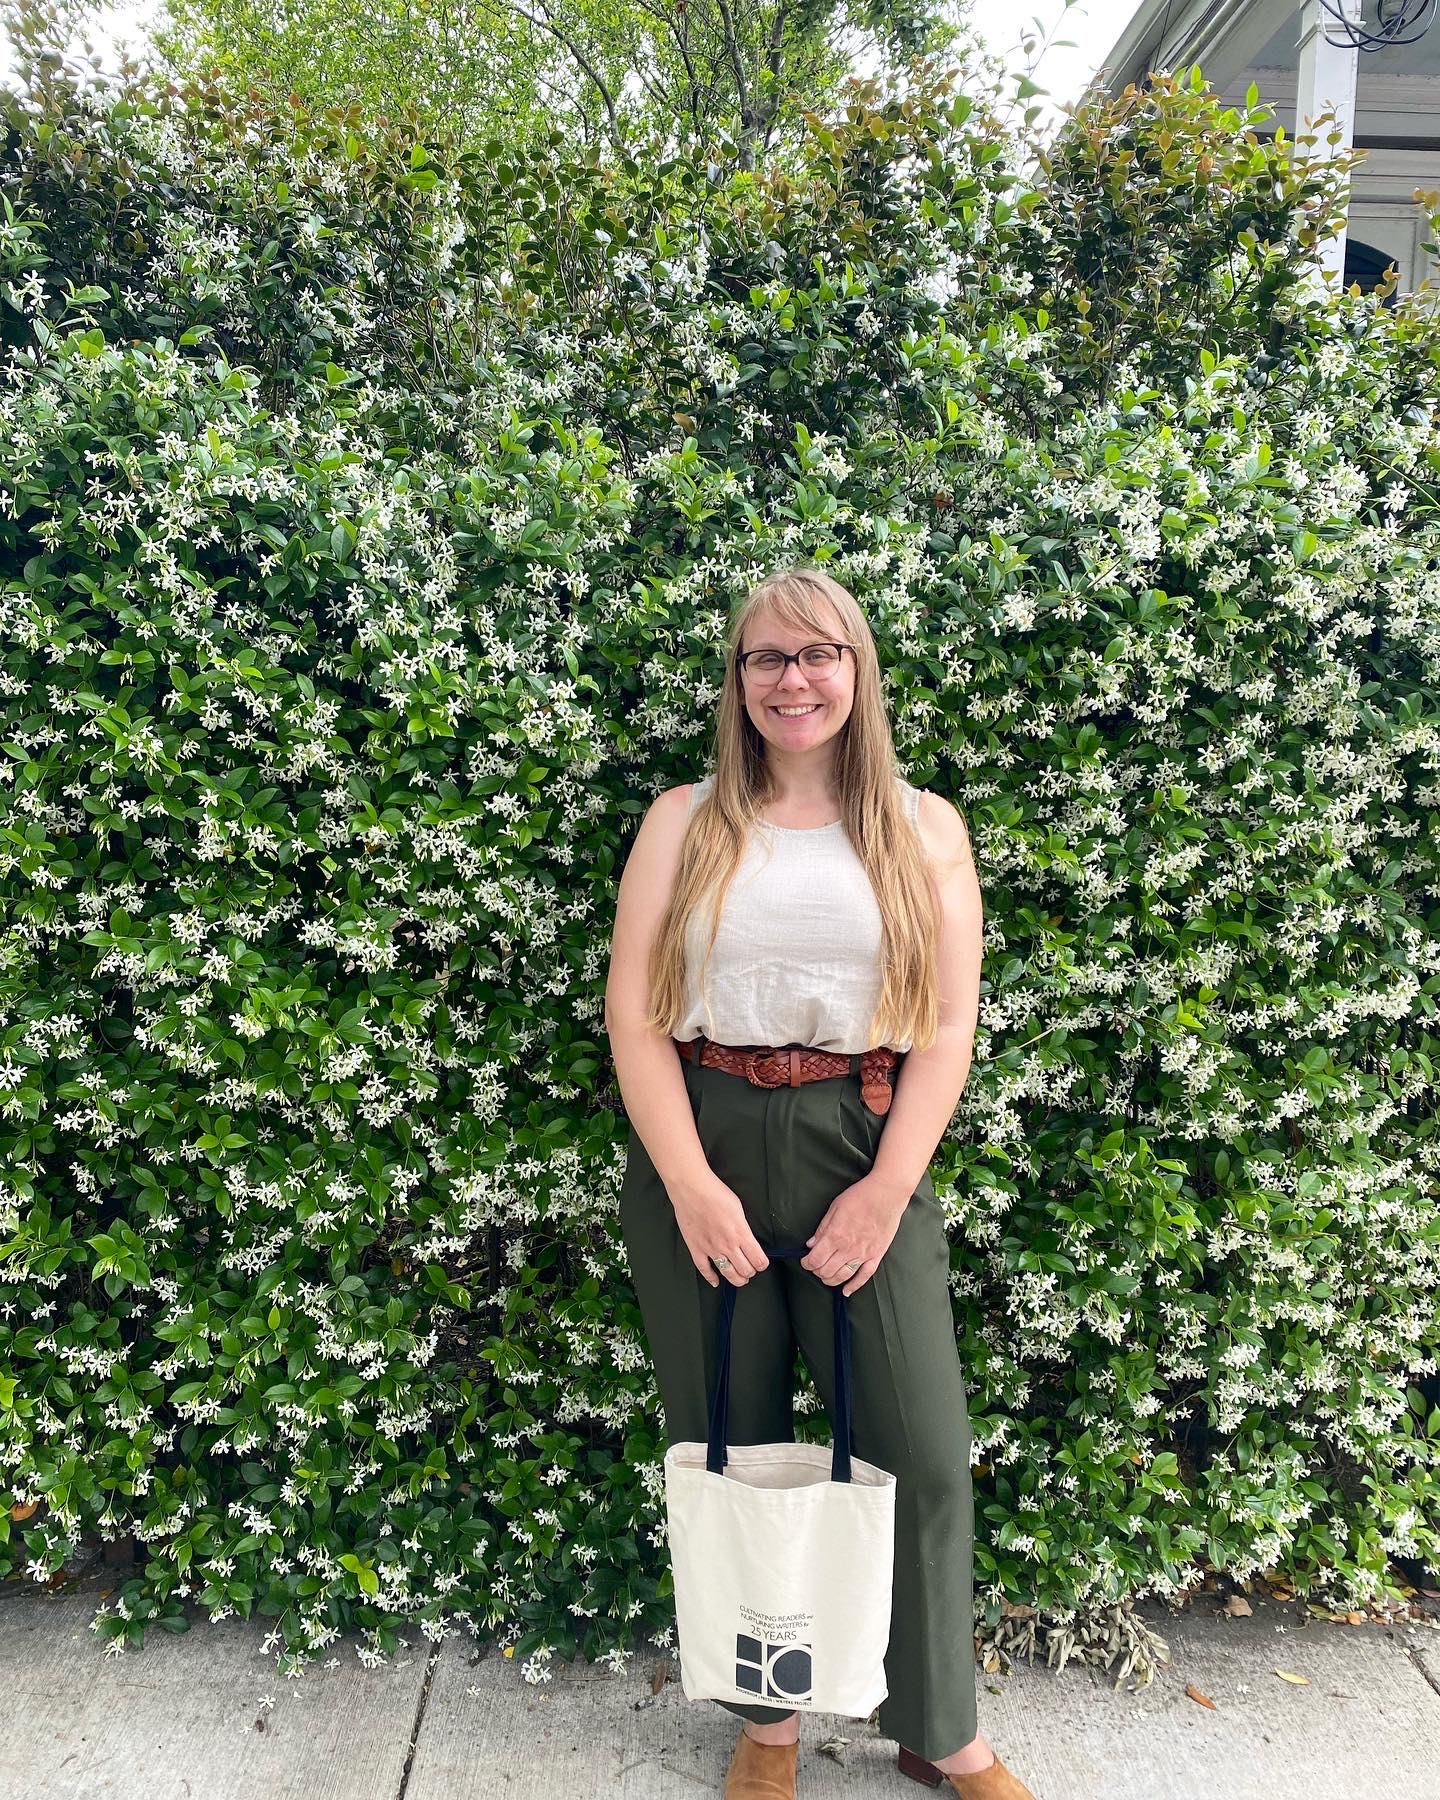 Image of poet Katherine Gaffney standing in front of a tall bush filled with flowers. Gaffney holds a canvas bag in both hands and smiles into the camera.